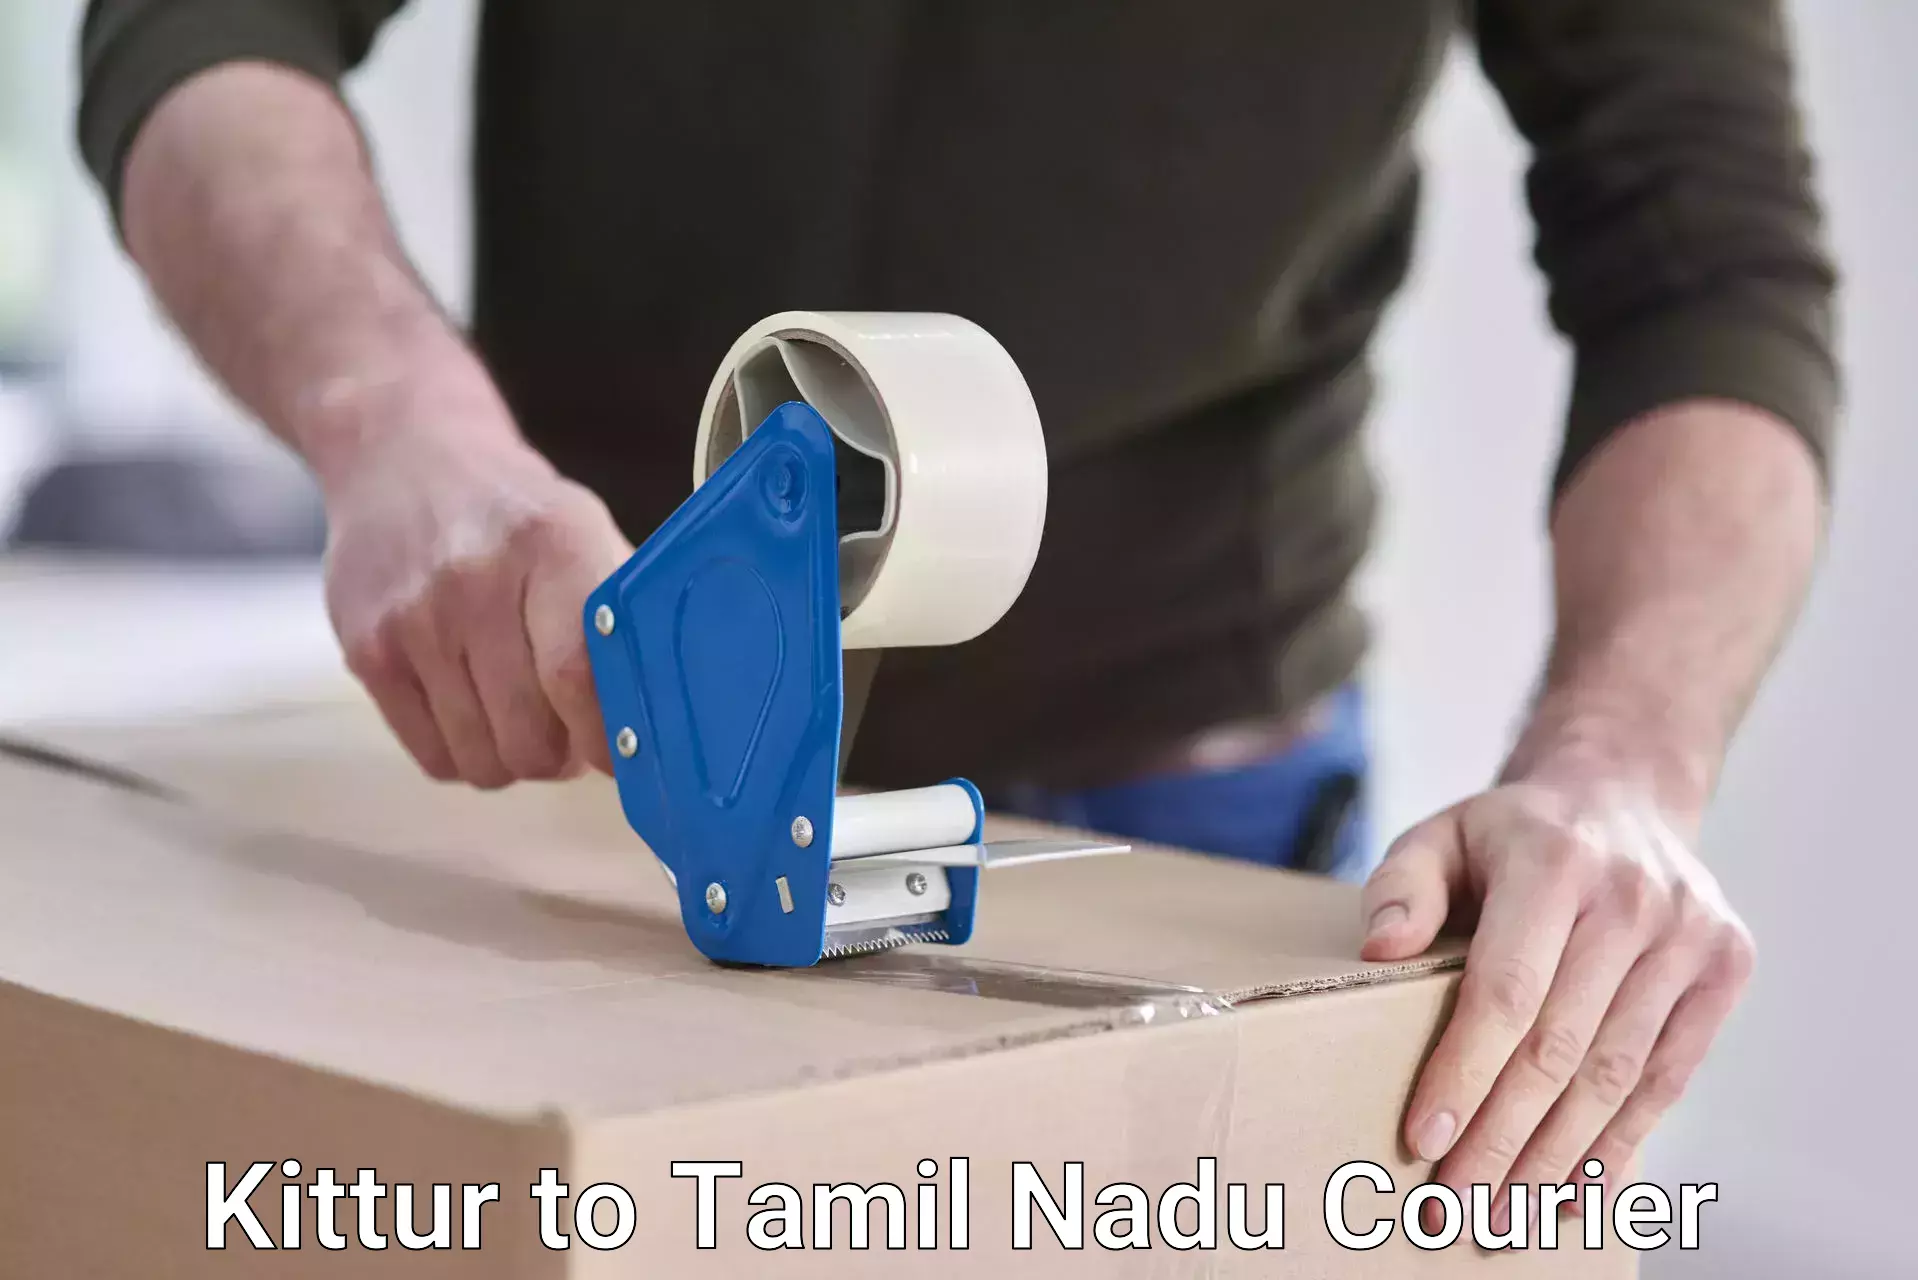 Personalized courier experiences Kittur to Tamil Nadu